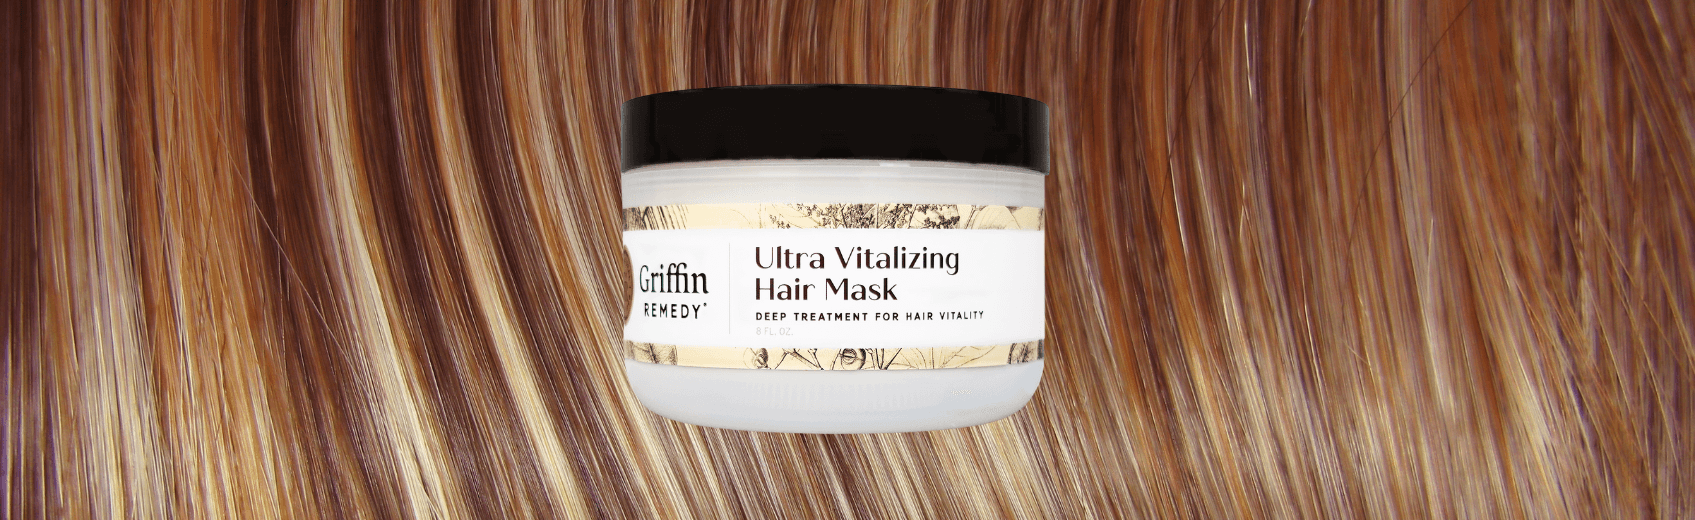 Unlocking Beautiful Hair: A Step-by-Step Guide to Using Griffin Remedy's Ultra Vitalizing Hair Mask - Griffin Remedy